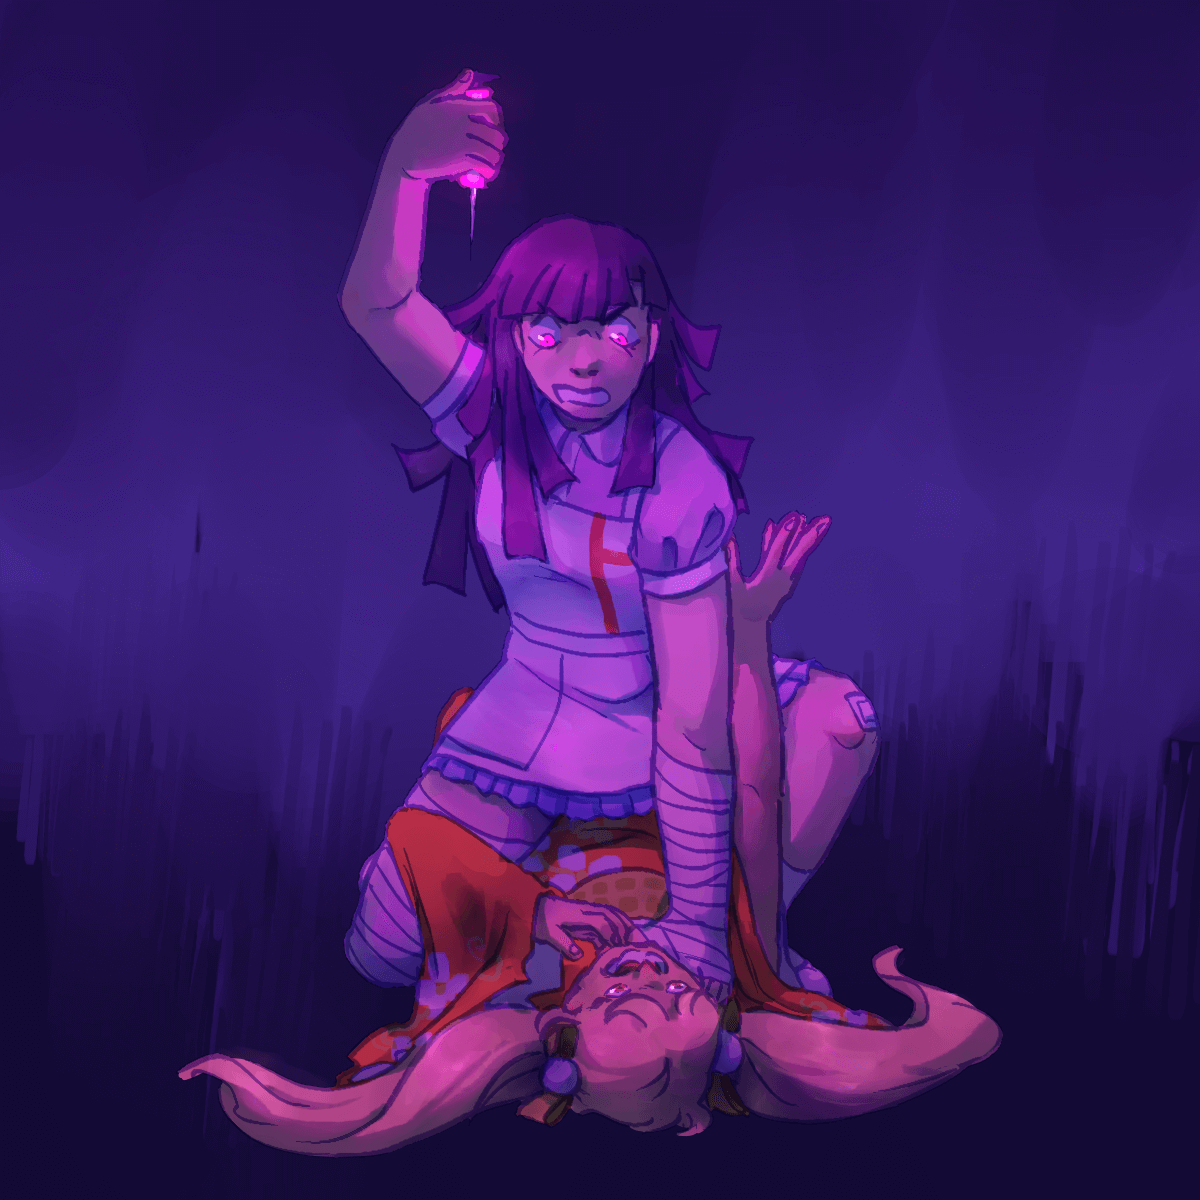 a drawing of mikan and hiyoko. hiyoko is reaching up at mikan, who is pinning her
		down by the neck with one hand and raising a syringe with the other. the syringe glows magenta